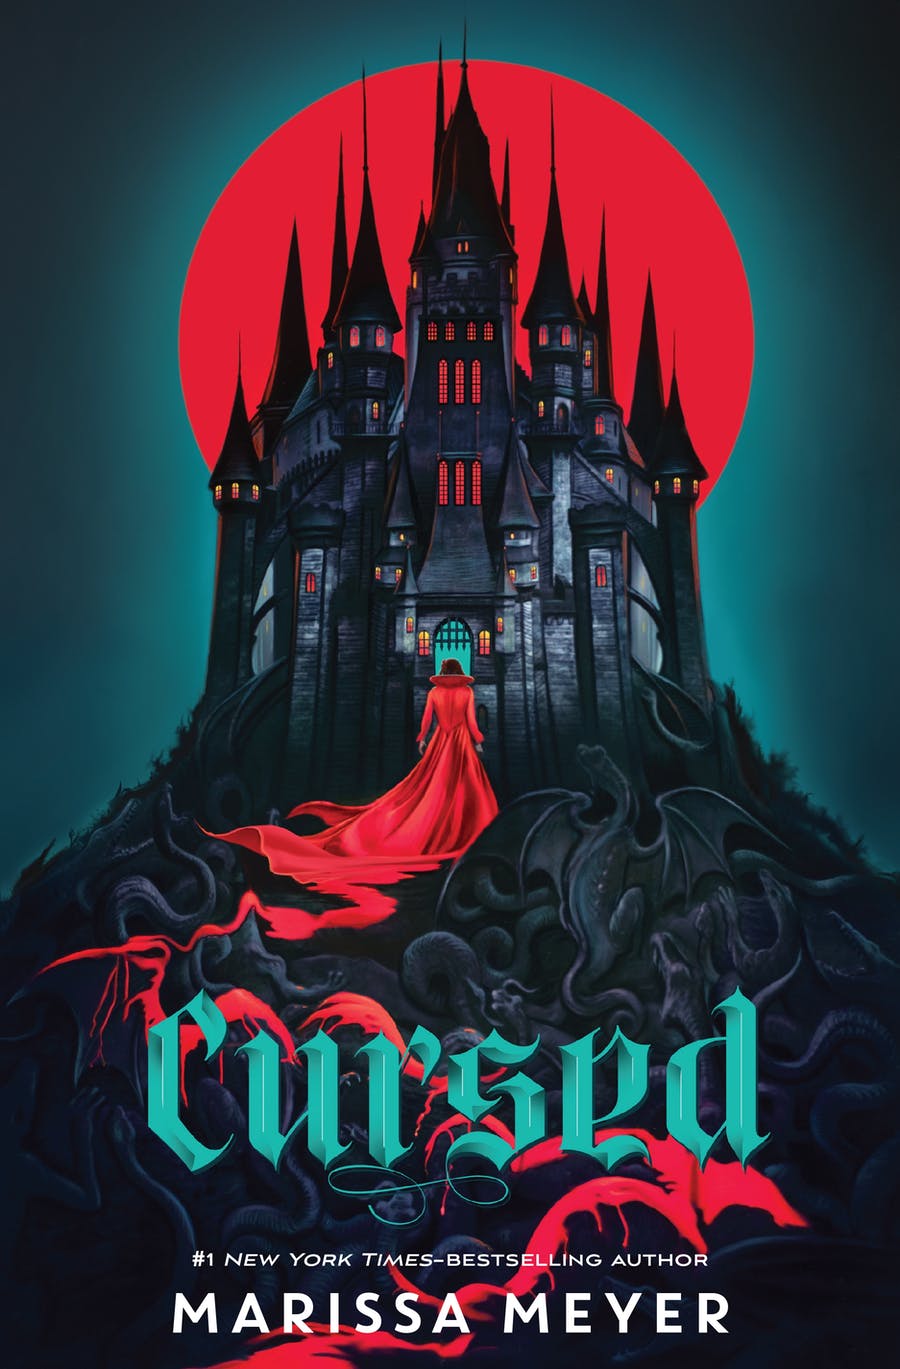 In-Person Event with Marissa Meyer/Cursed